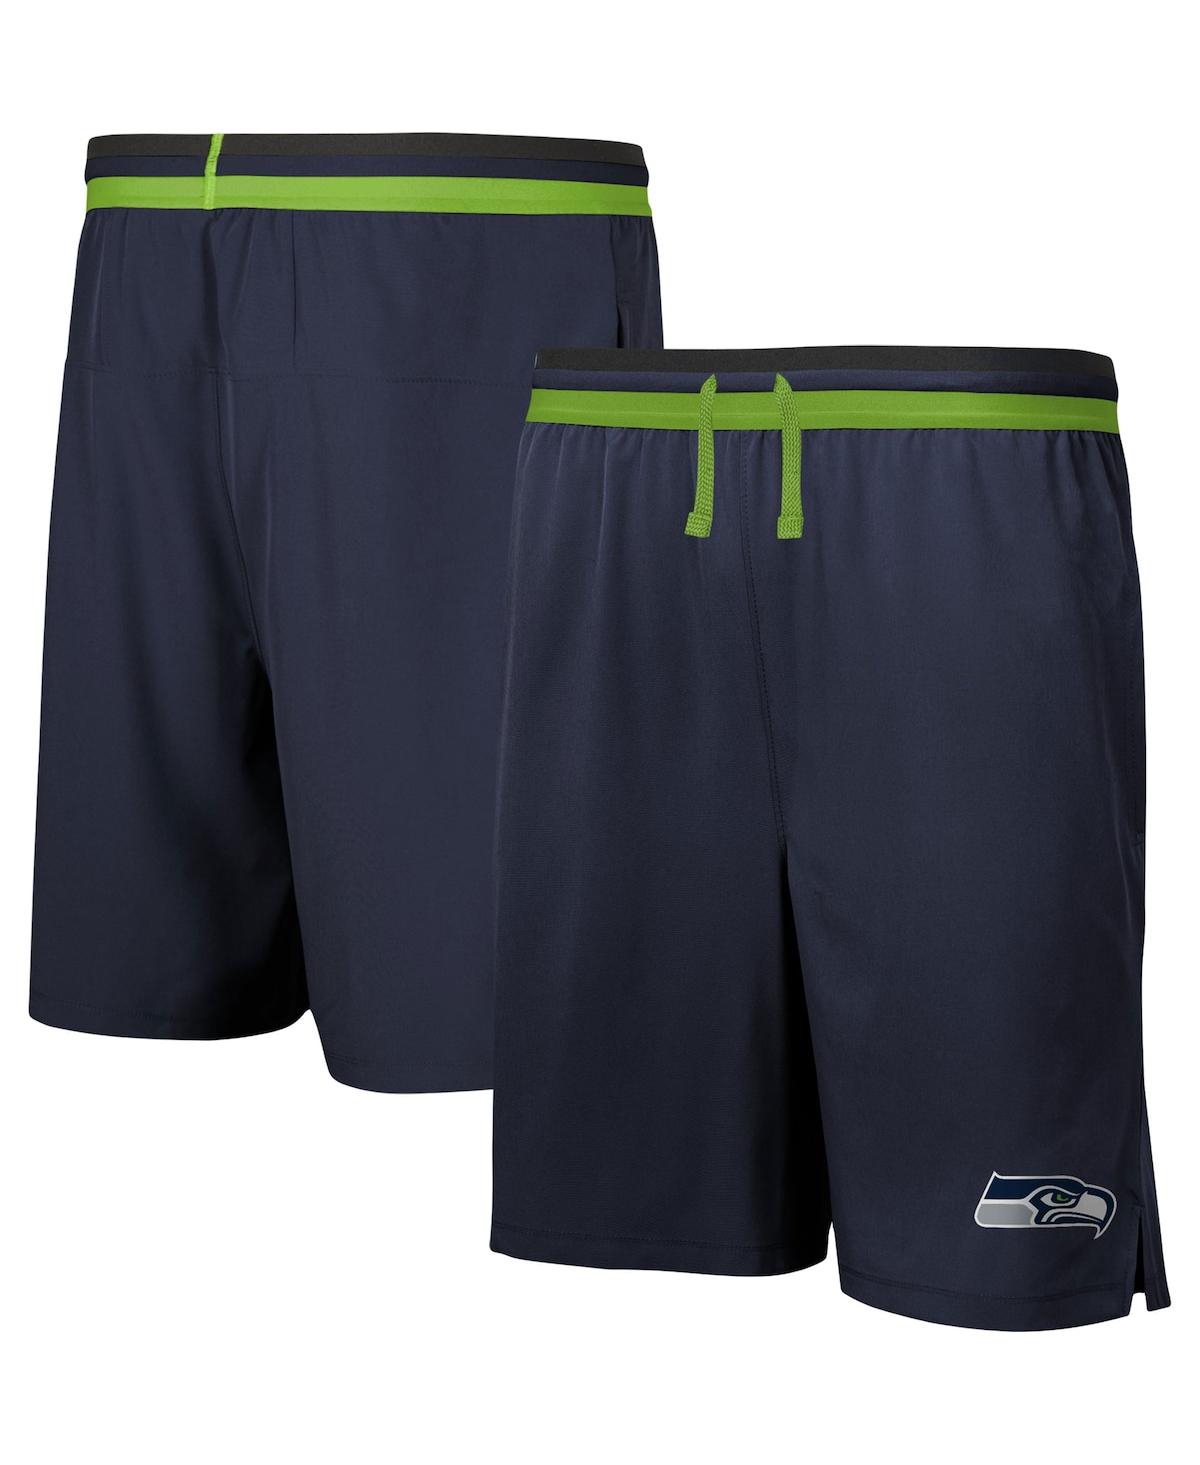 Men's Navy Seattle Seahawks Cool Down Tri-Color Elastic Training Shorts - Navy